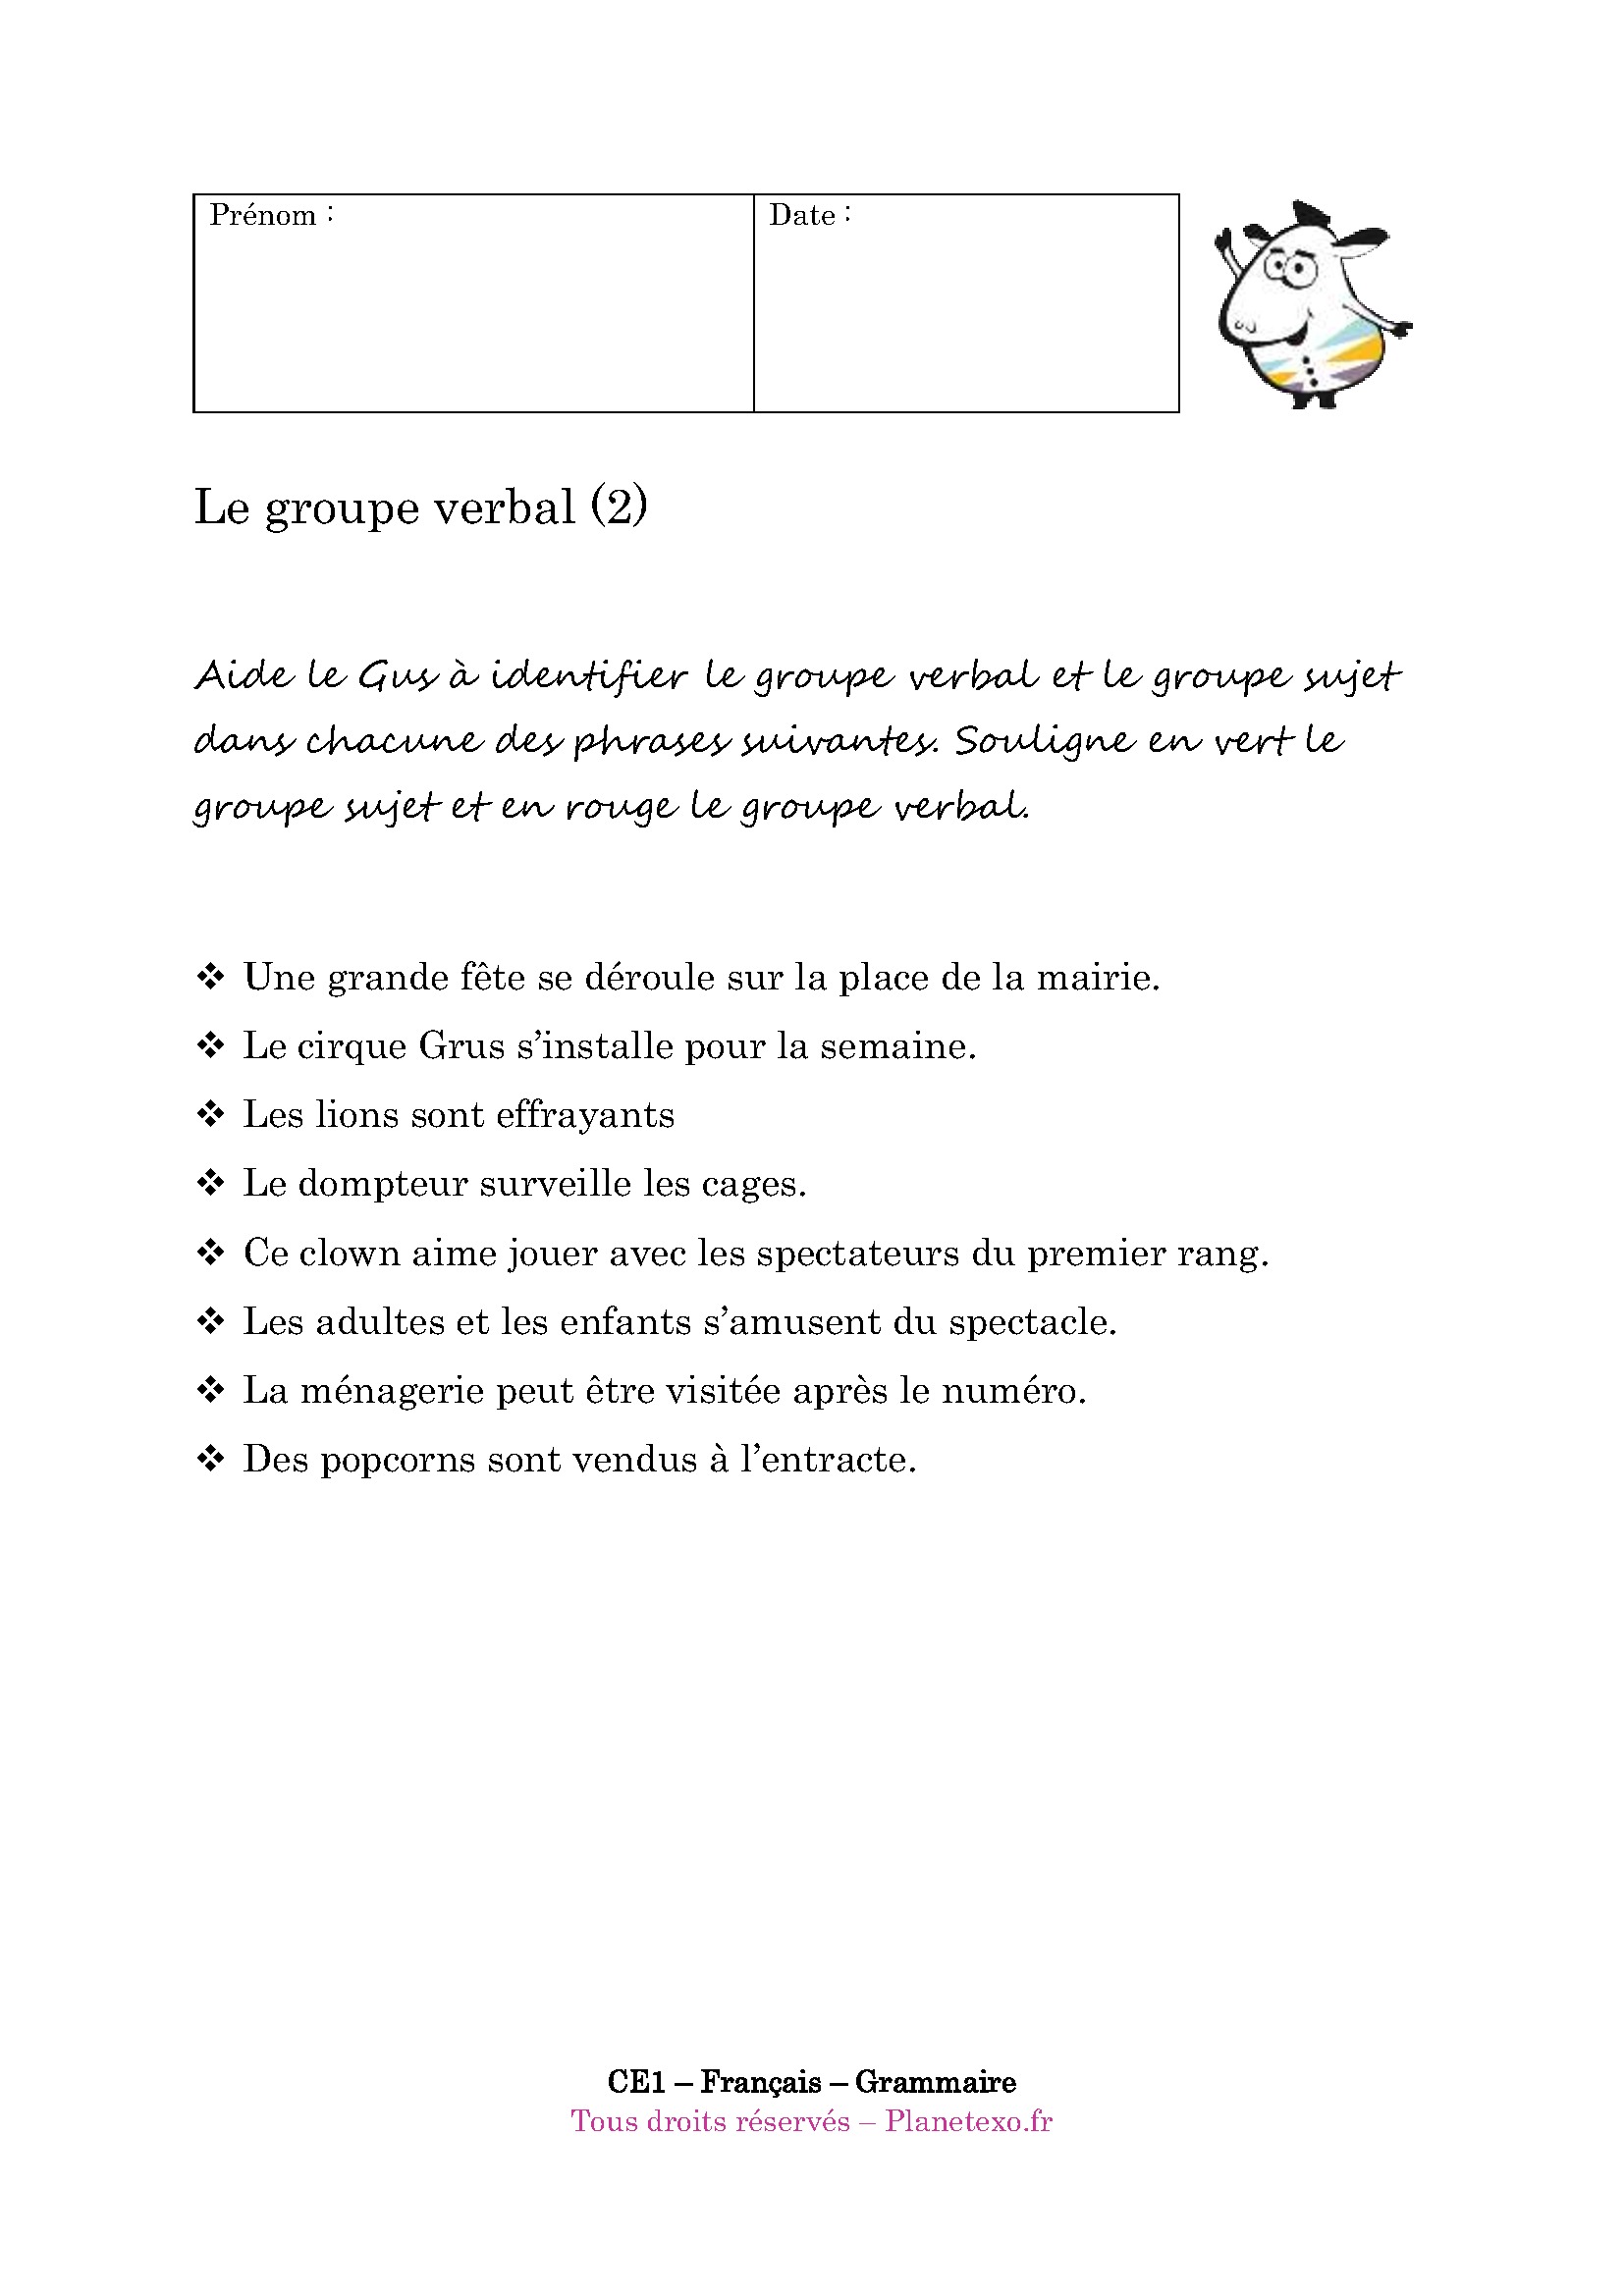 groupe verbal, groupe sujet, verbe